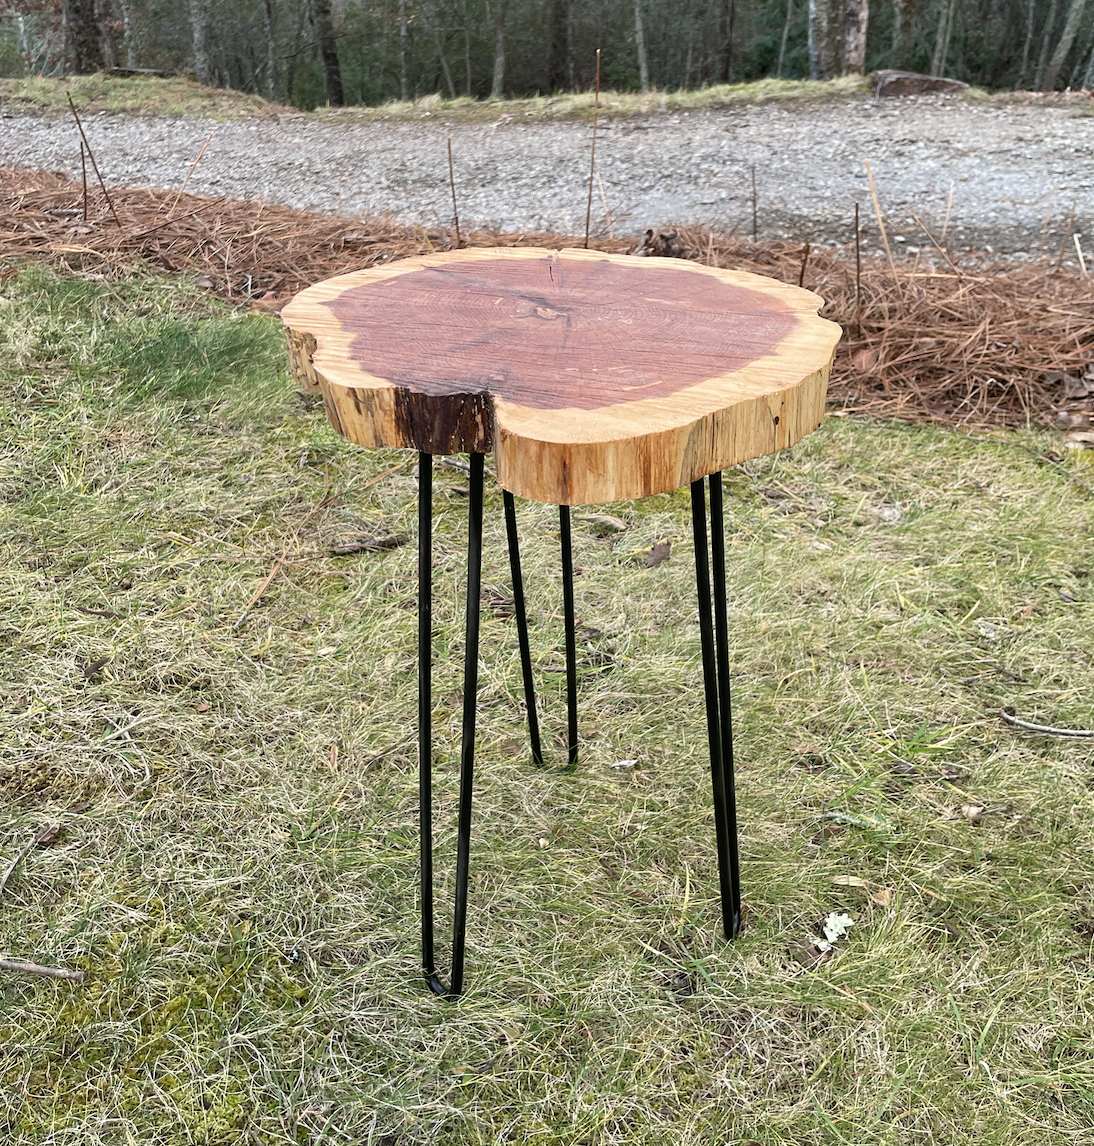 The side table pictured is made from hand-shaped metal hairpin legs and a handmade live edge cedar slab with a food safe finish. 